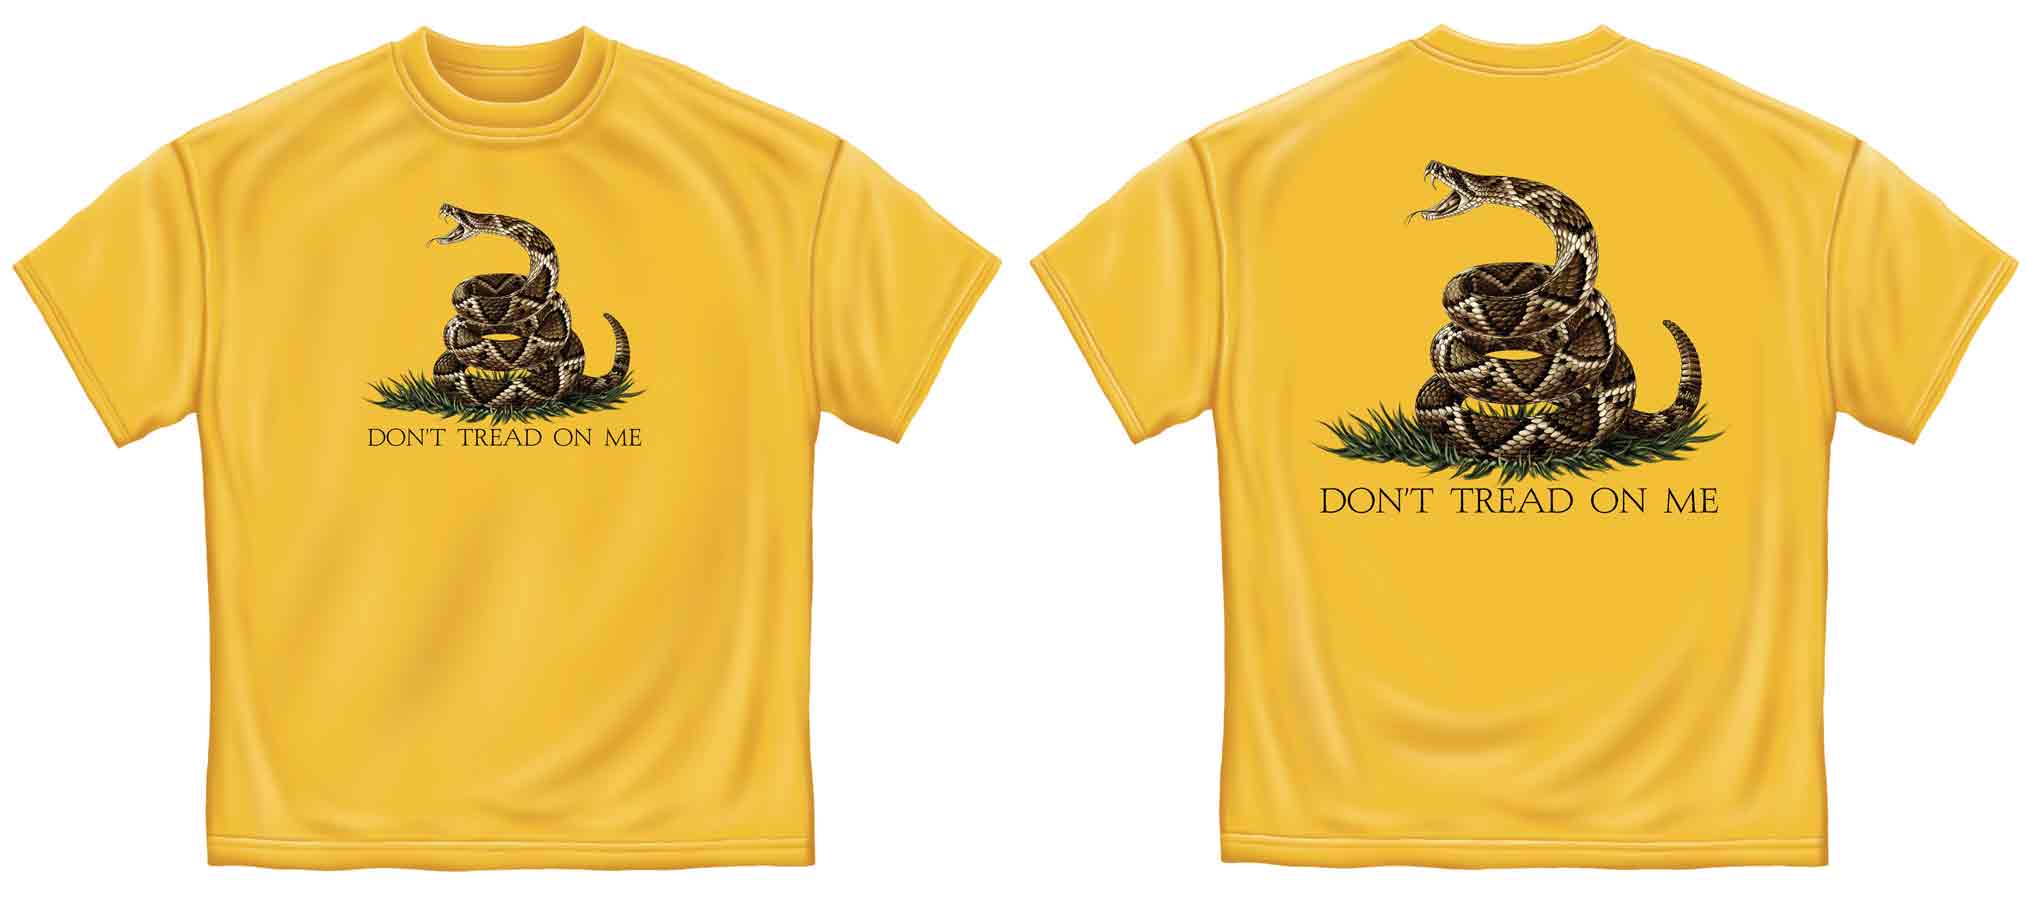 DONT TREAD ON ME TEES, SHOCKING YELLOW